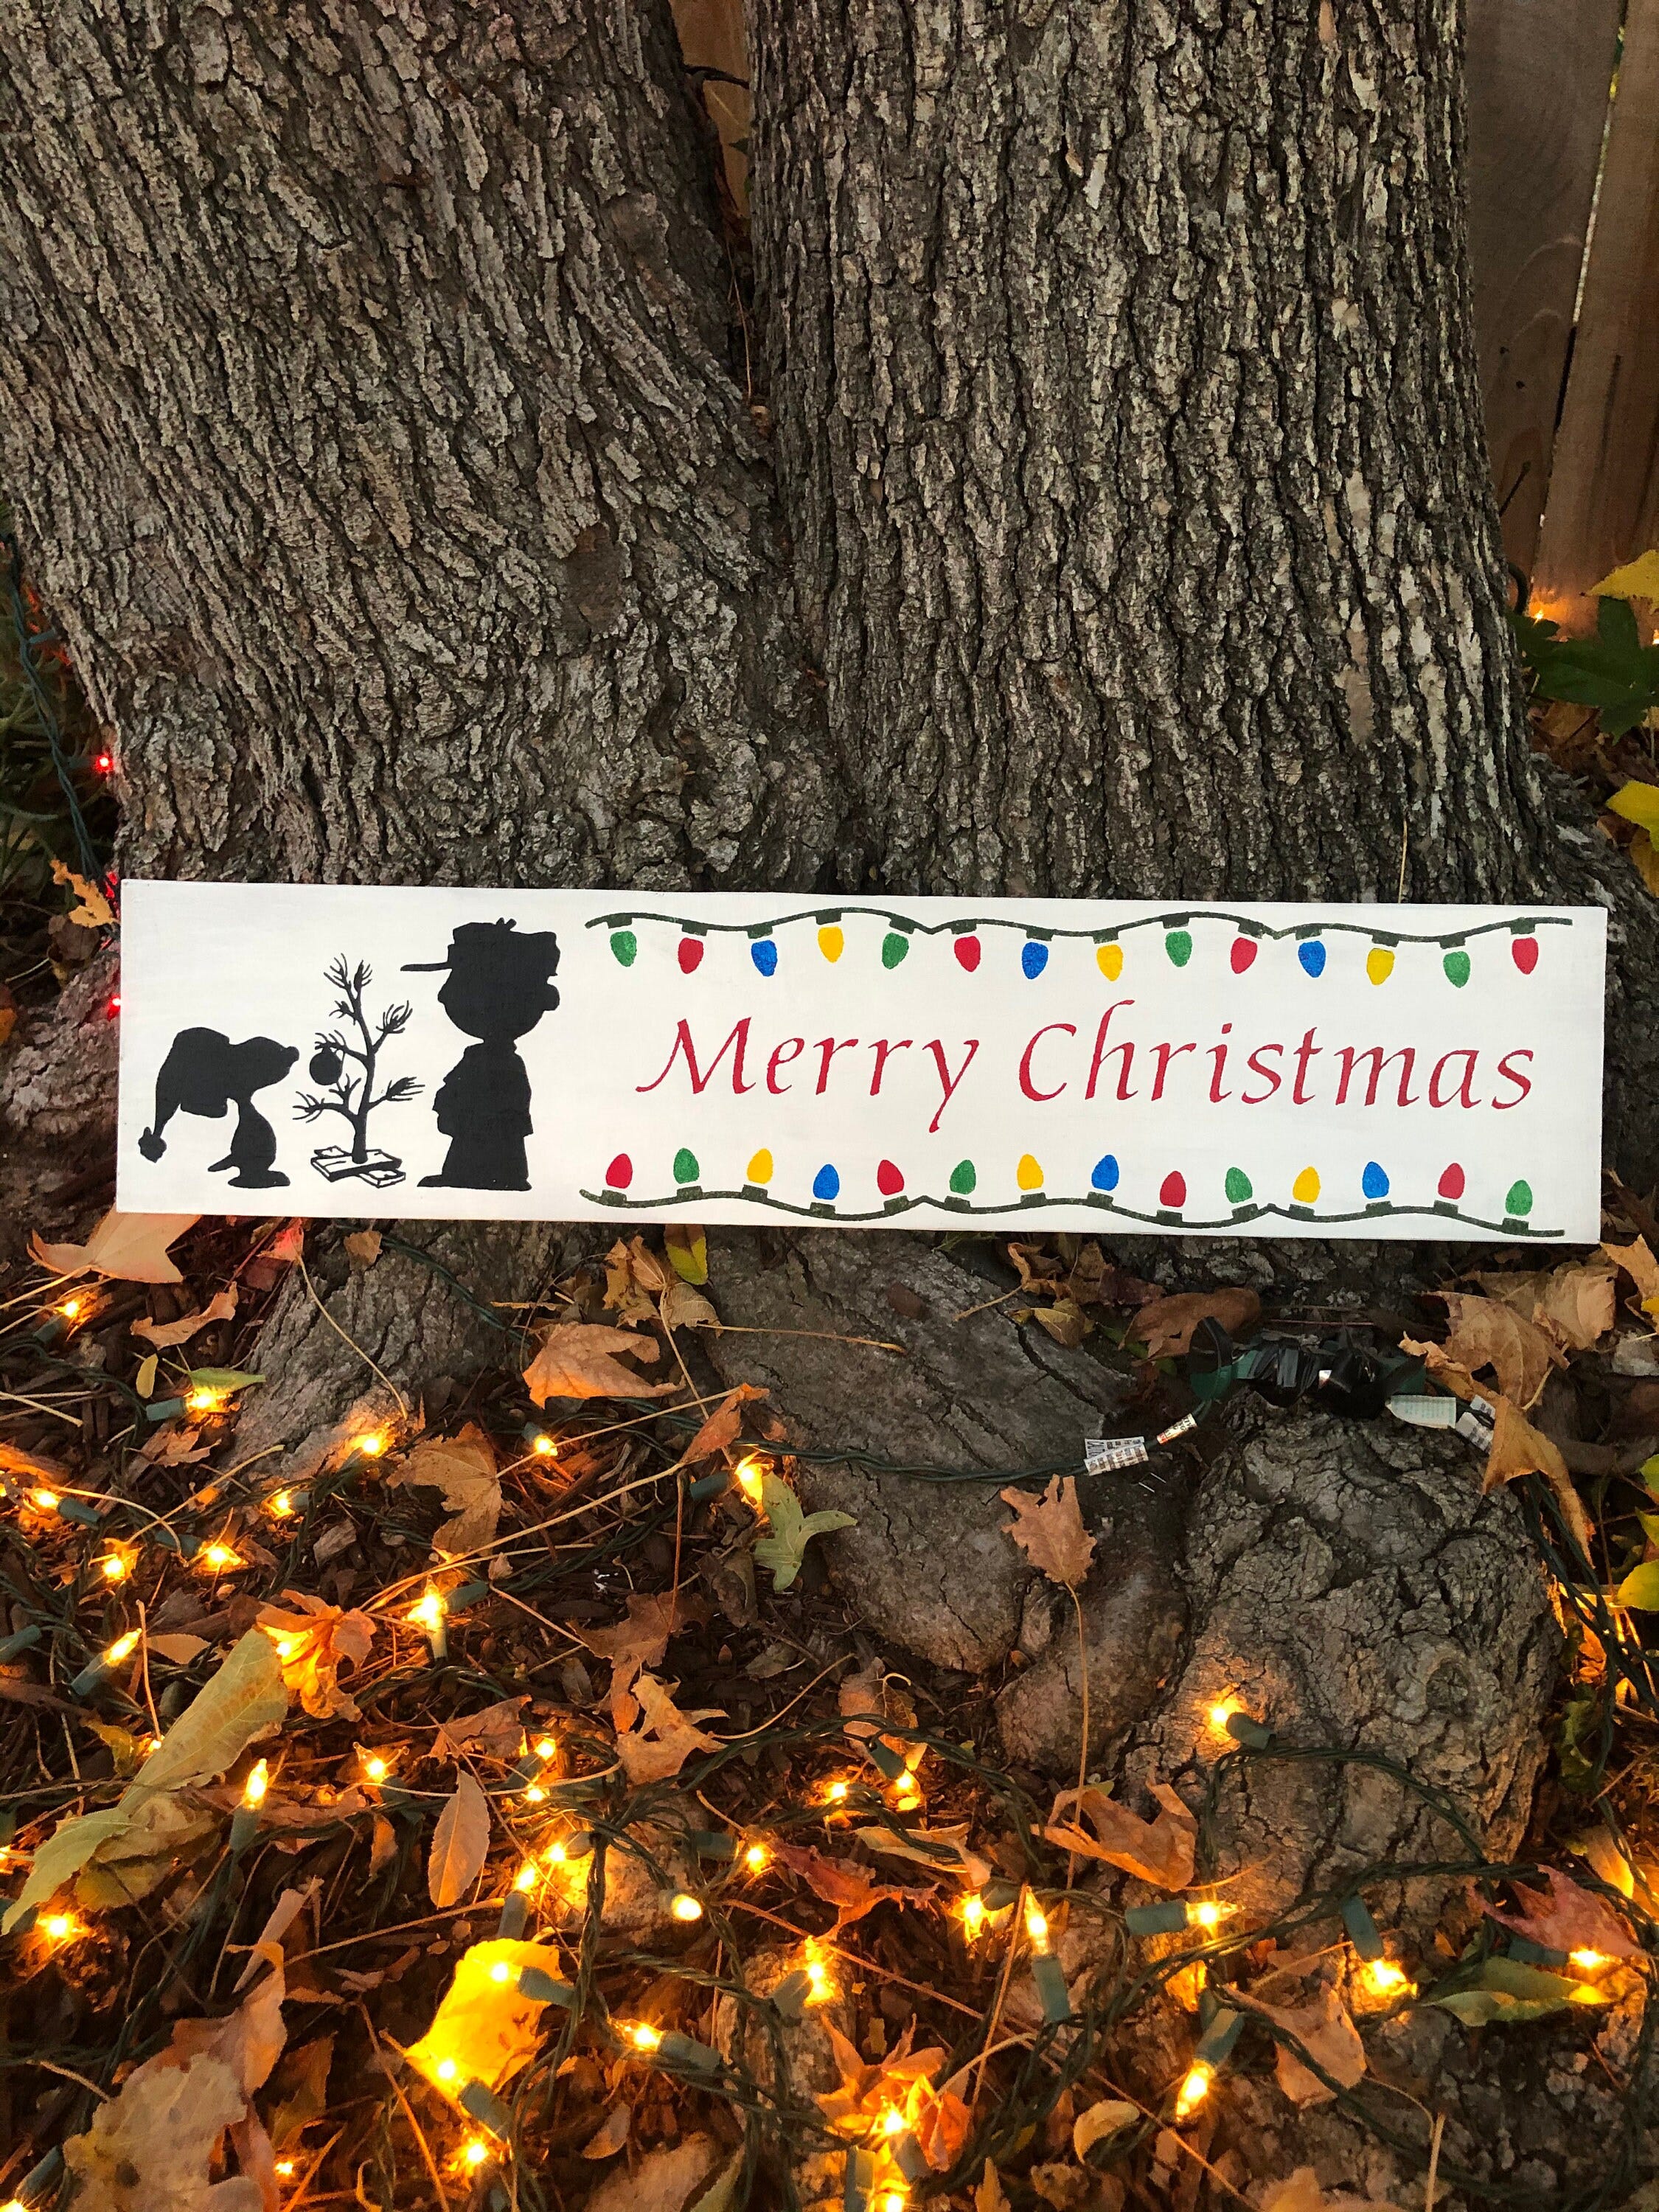 Merry Christmas Charlie Brown hanging sign